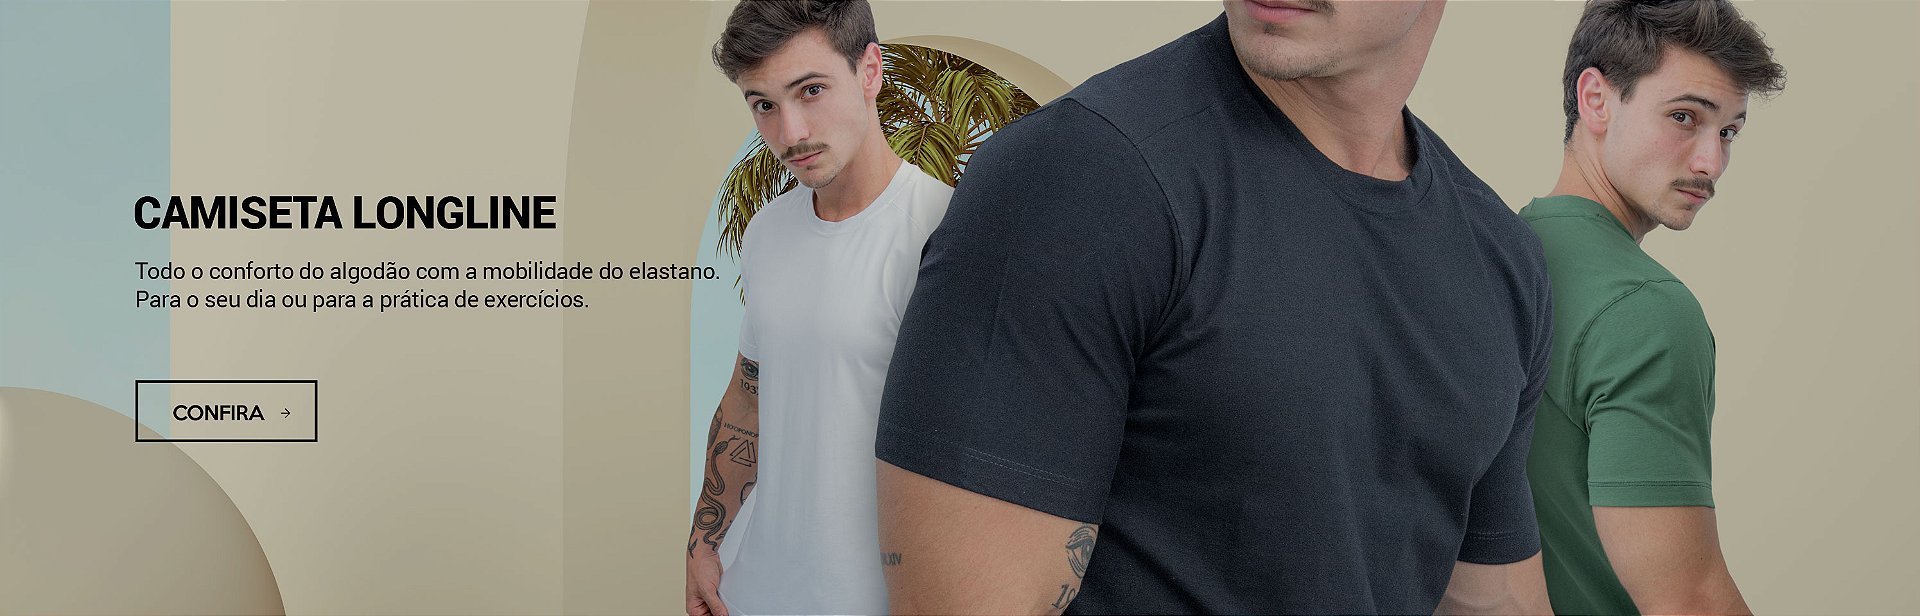 Chief&Co - Roupas Masculinas